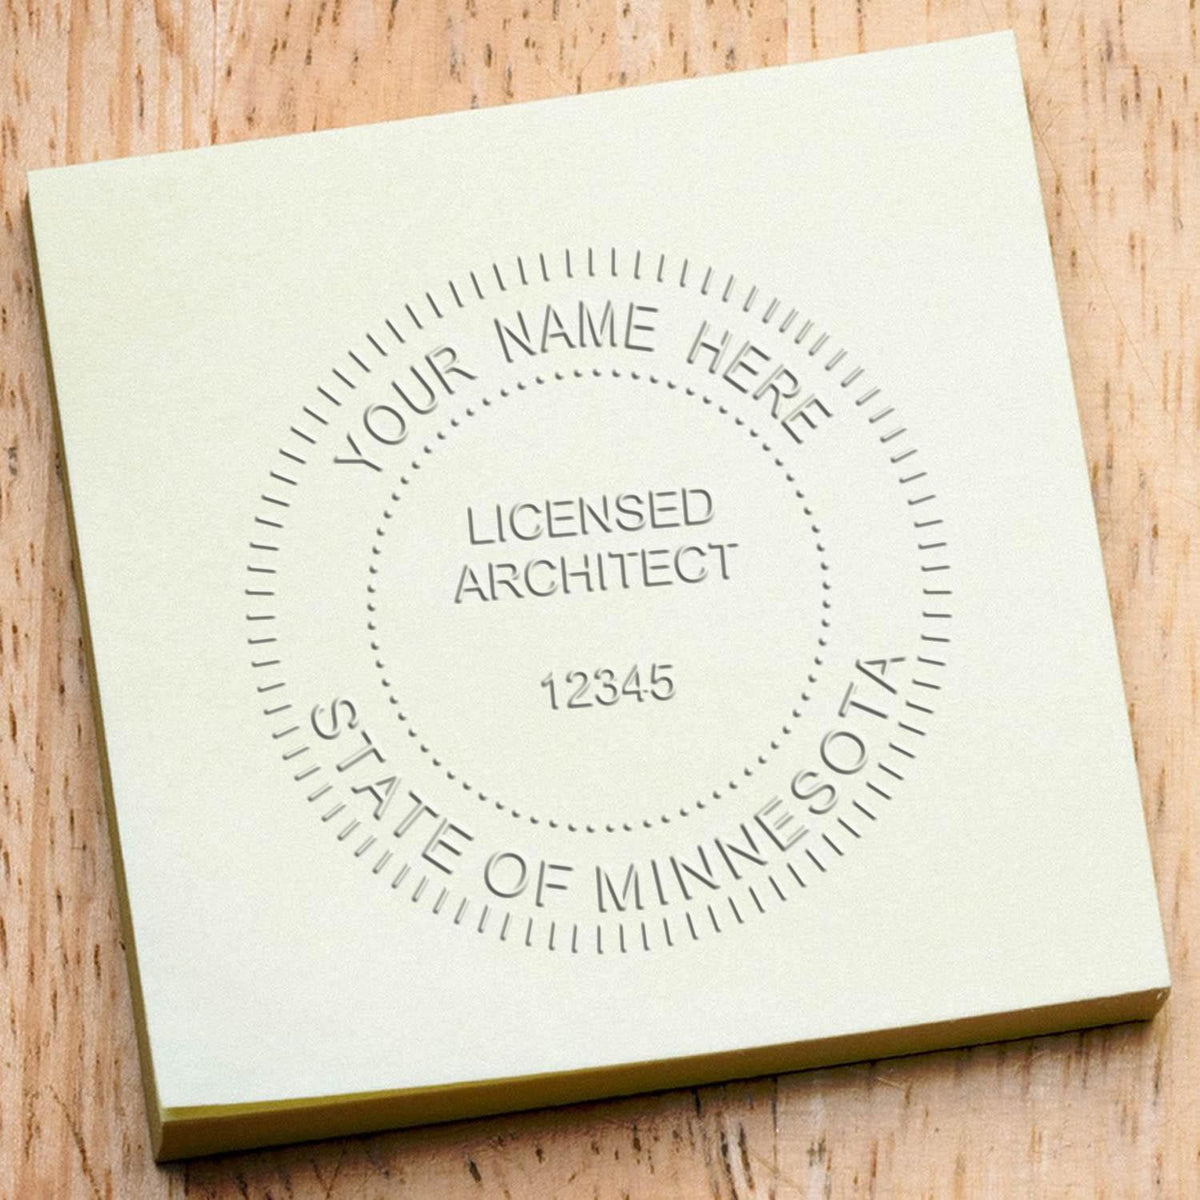 A stamped impression of the Minnesota Desk Architect Embossing Seal in this stylish lifestyle photo, setting the tone for a unique and personalized product.